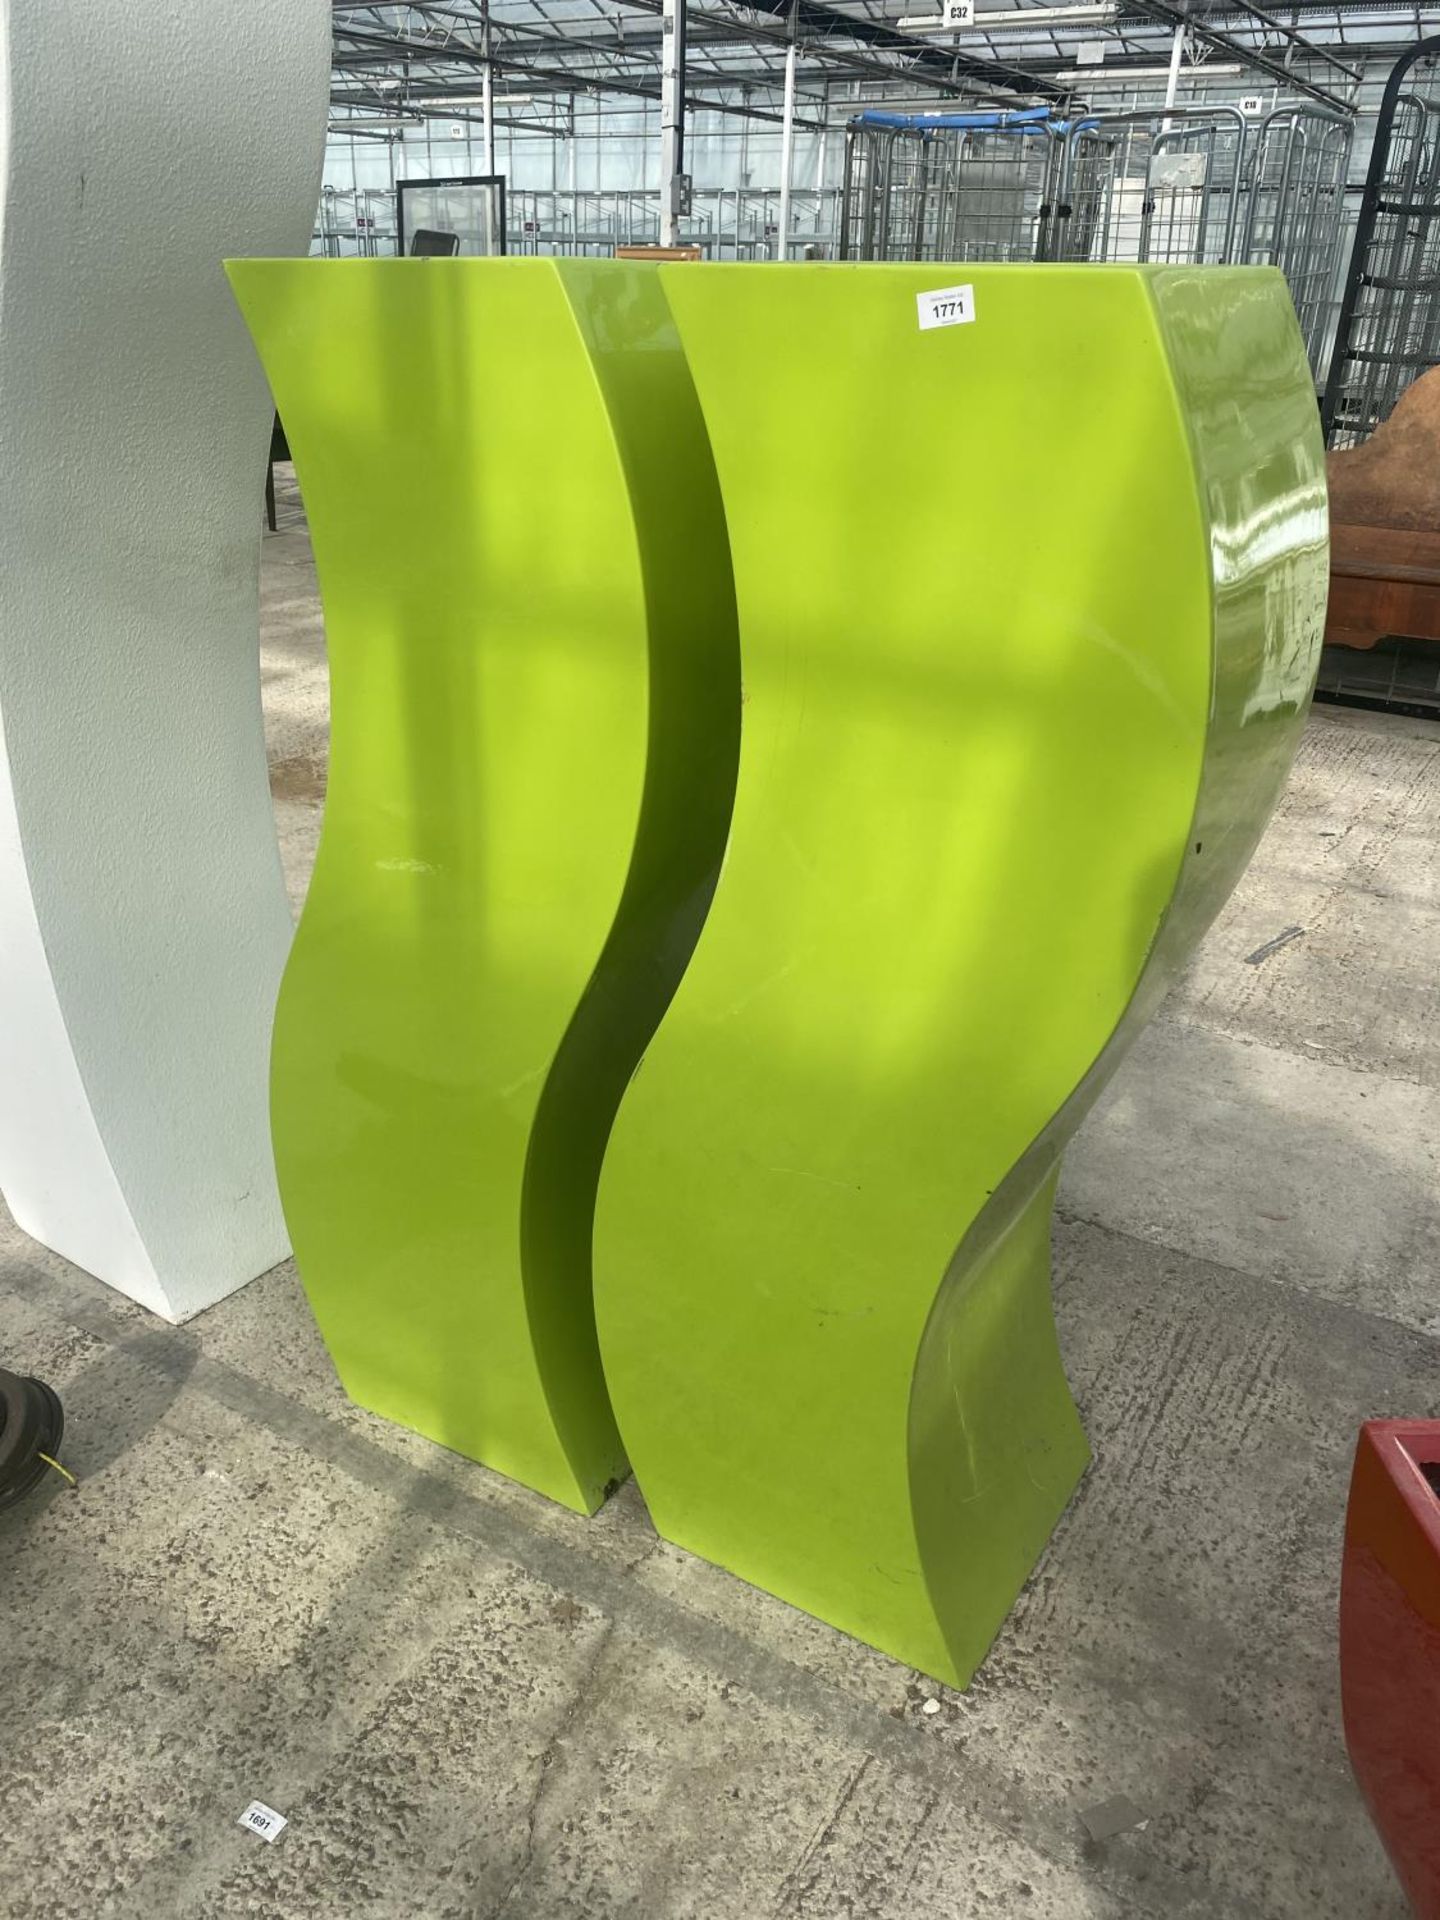 A PAIR OF UNUSUAL TALL AND CURVED DECORATIVE GREEN PLASTIC PLANTERS (H:120CM) - Image 2 of 5